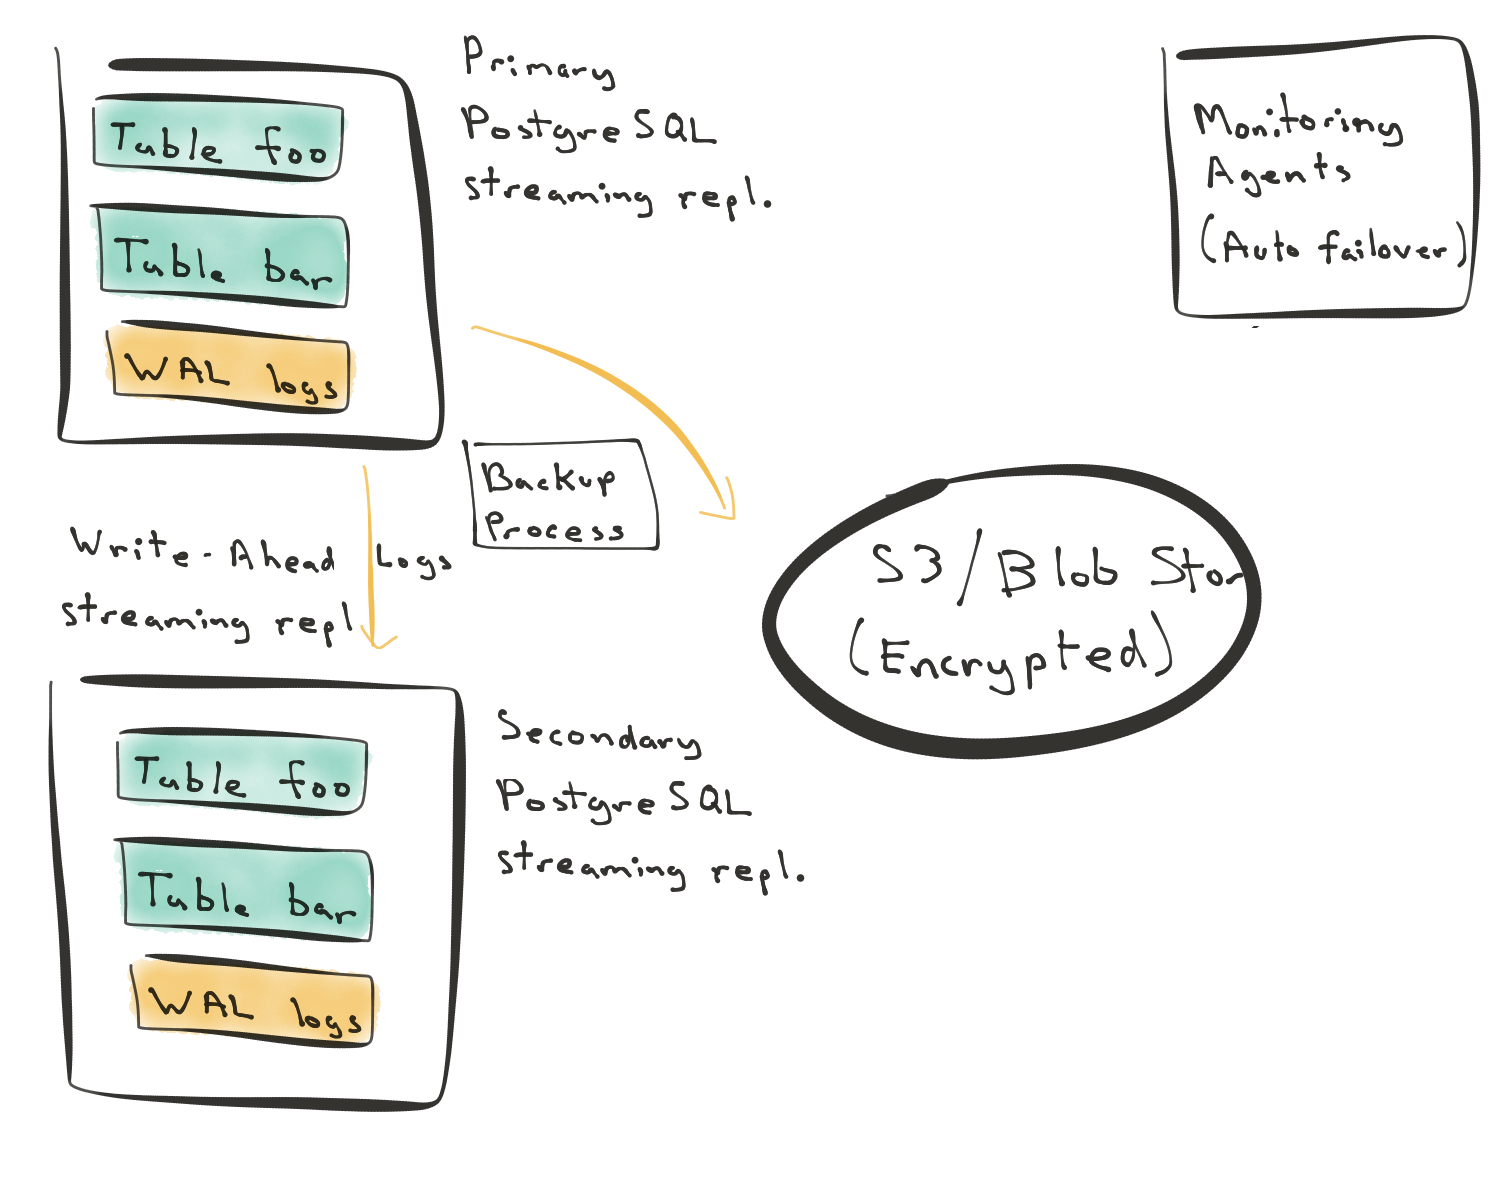 Figure 1 - Streaming replication in Postgres, with local storage